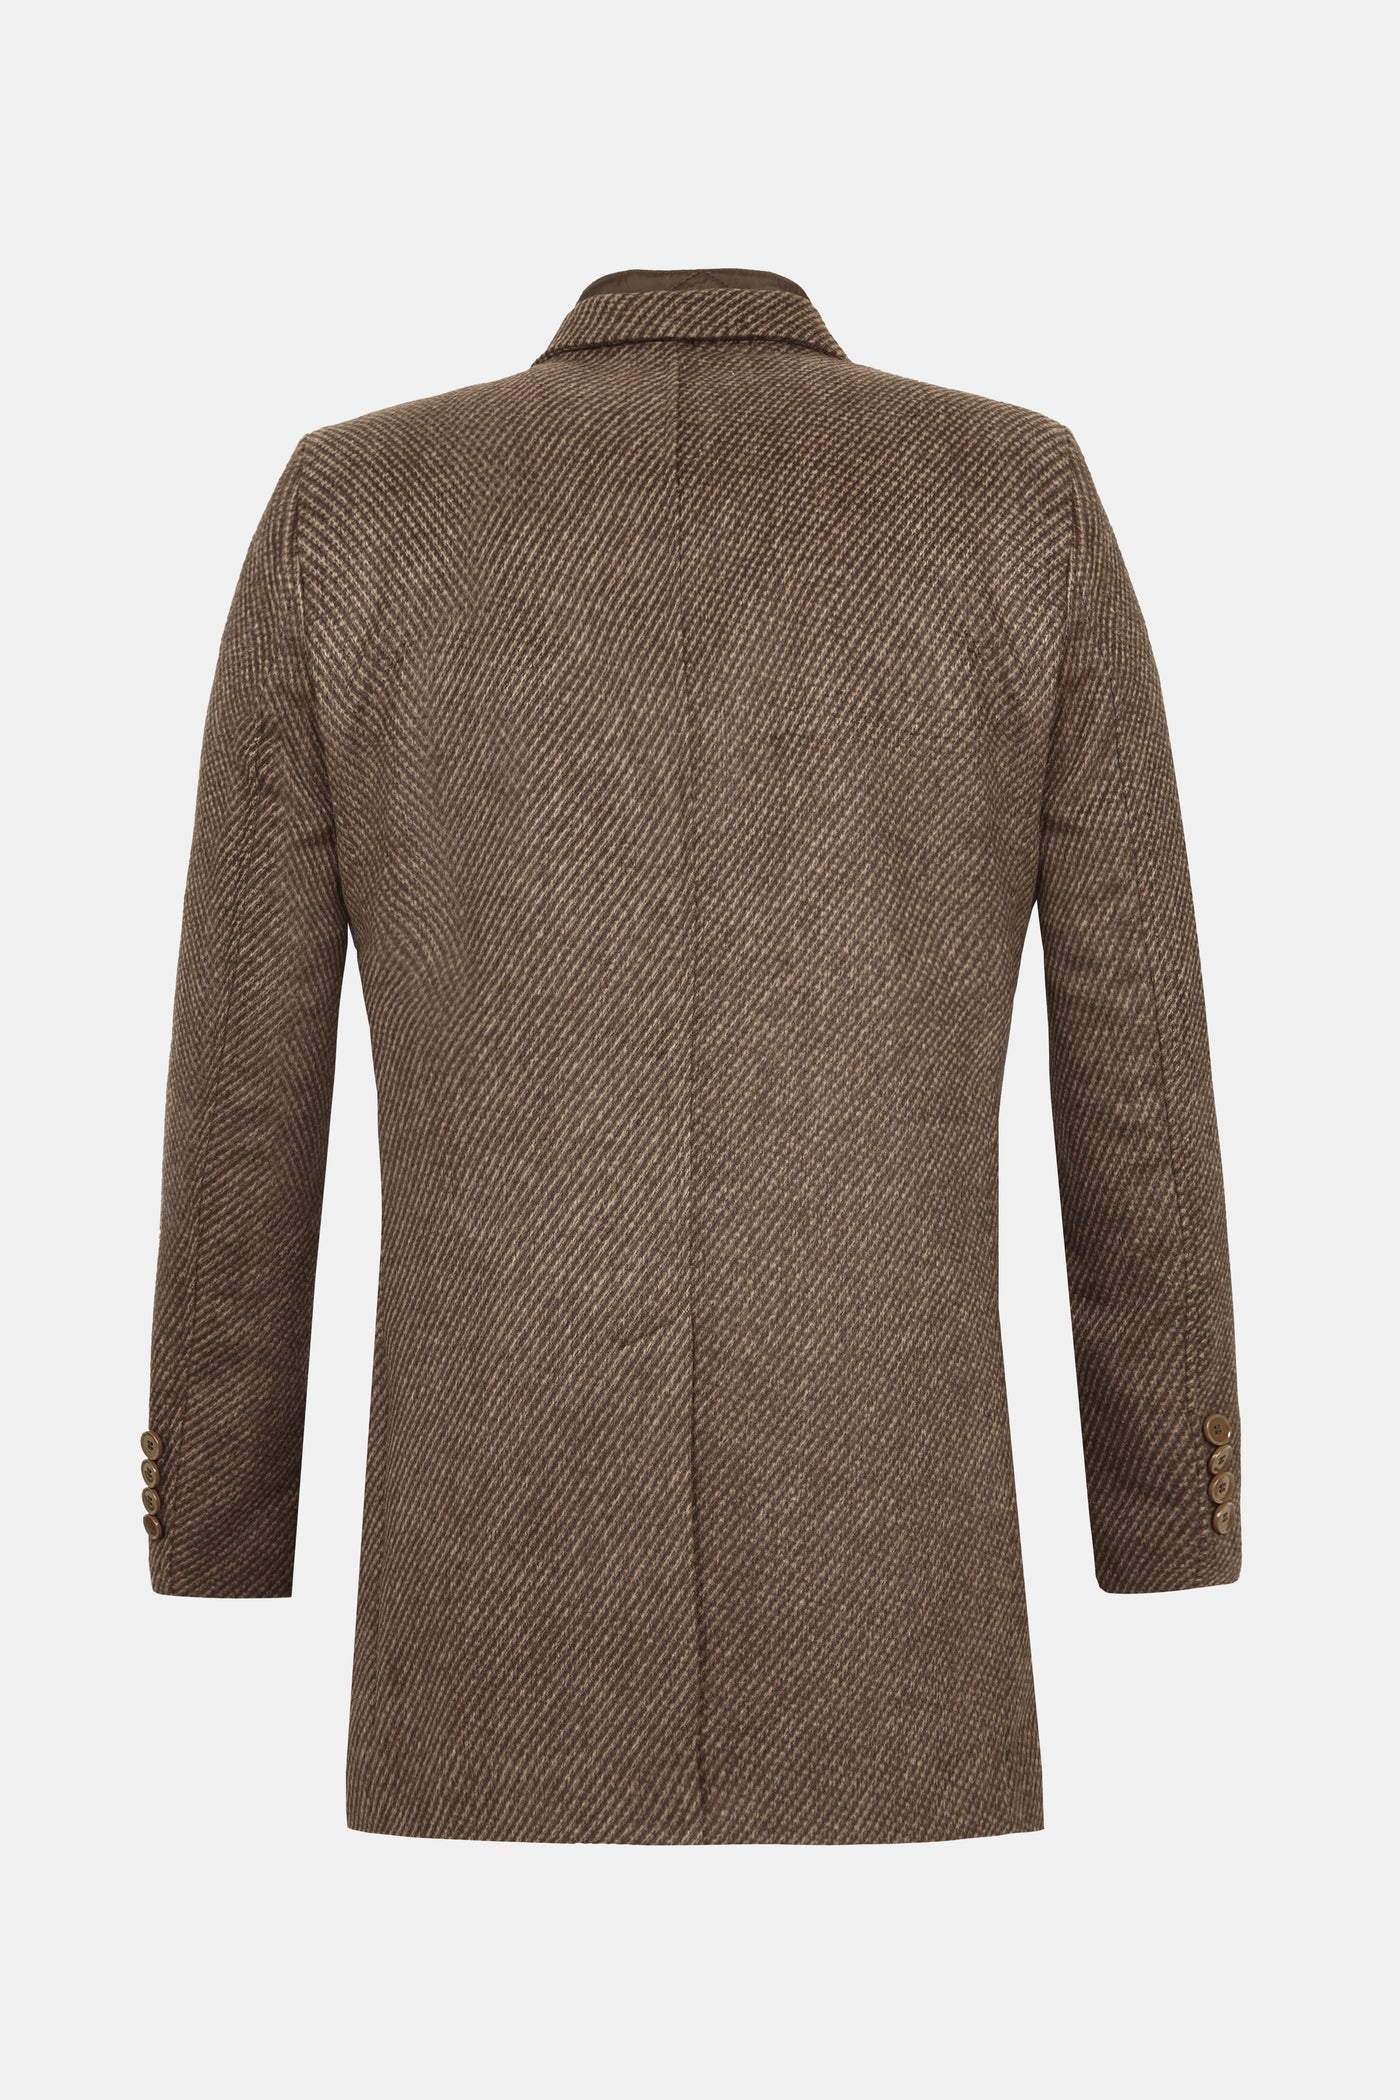 Jacquard Brown & Hazel Woven wide lapel Coat with removable padded piece